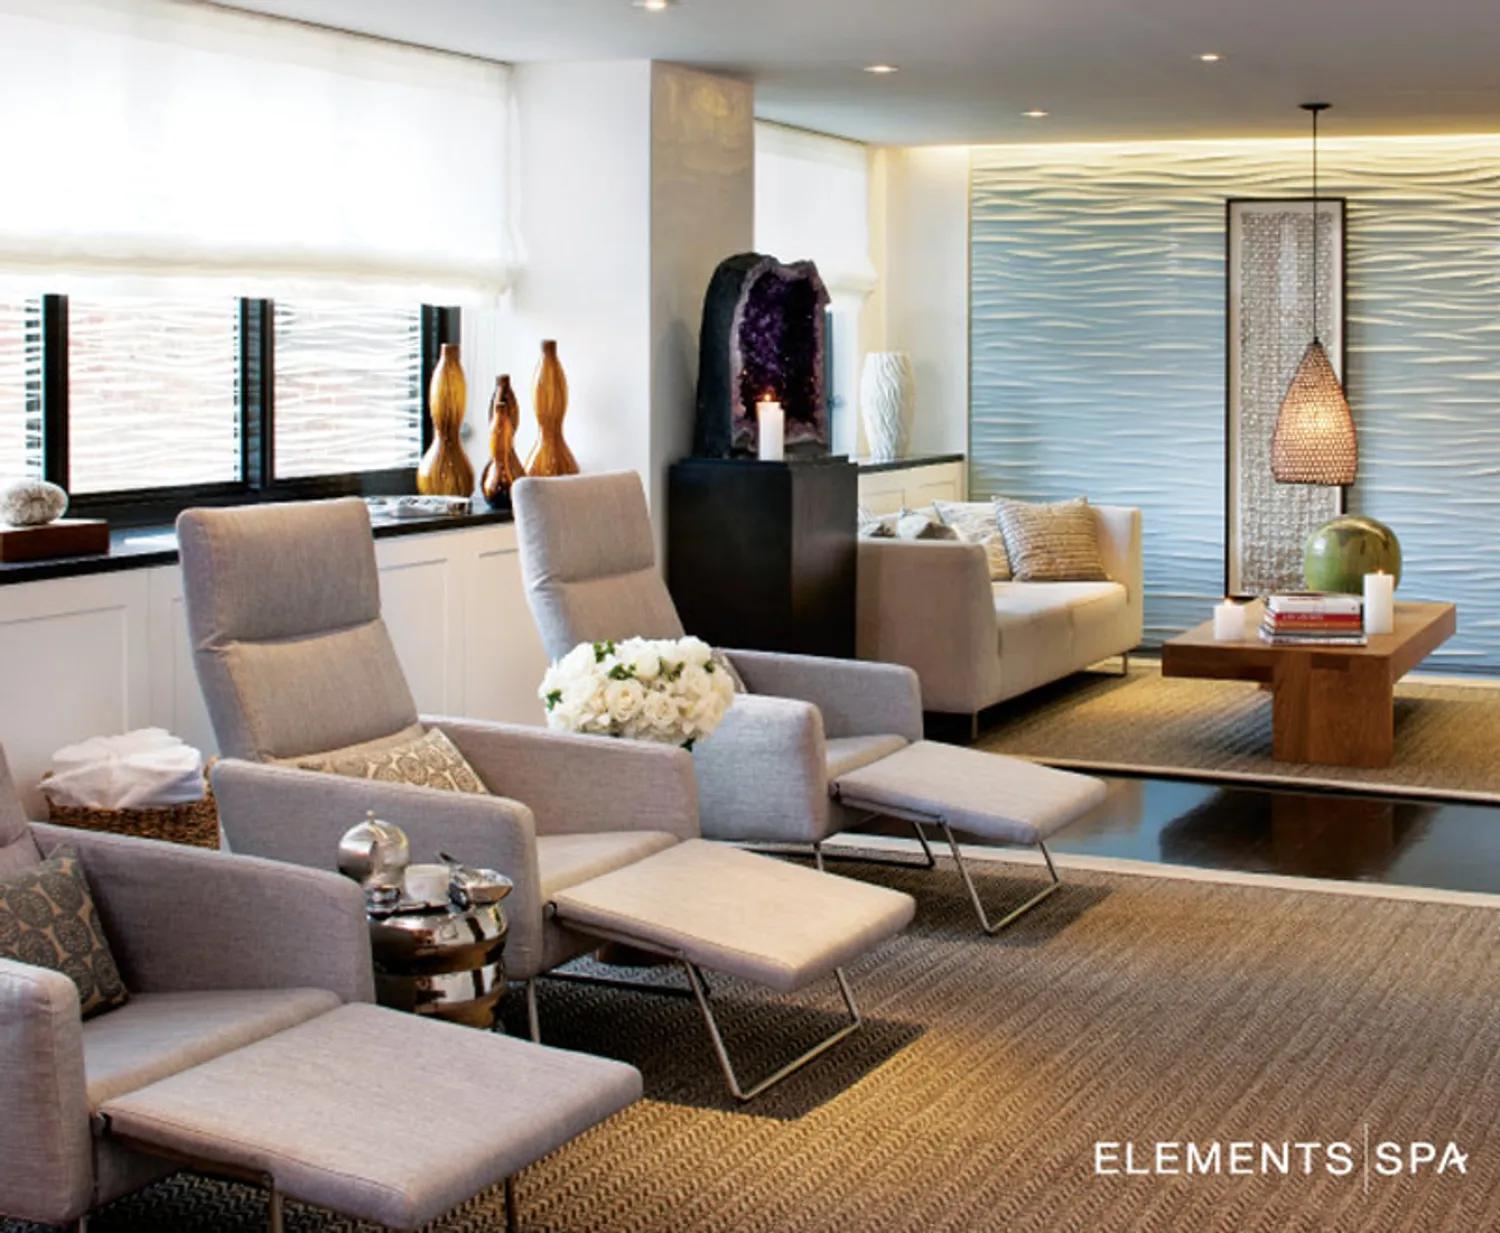 Elements Spa with facials, massages, and much more